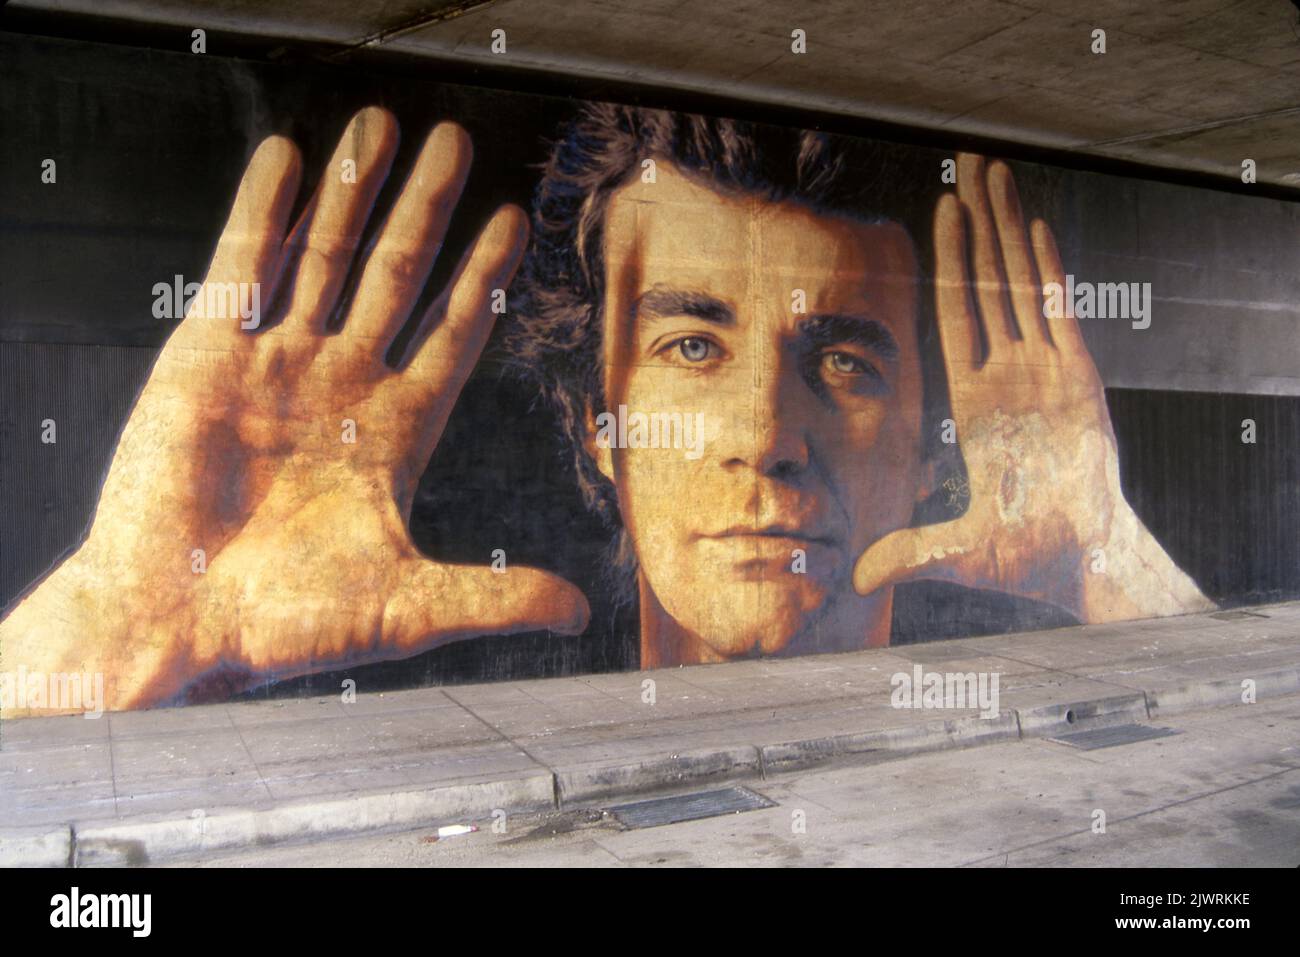 Art mural titled Jim Morphesis Monument painted by Kent Twitchell under freeway in downtown Los Angeles, CA Stock Photo